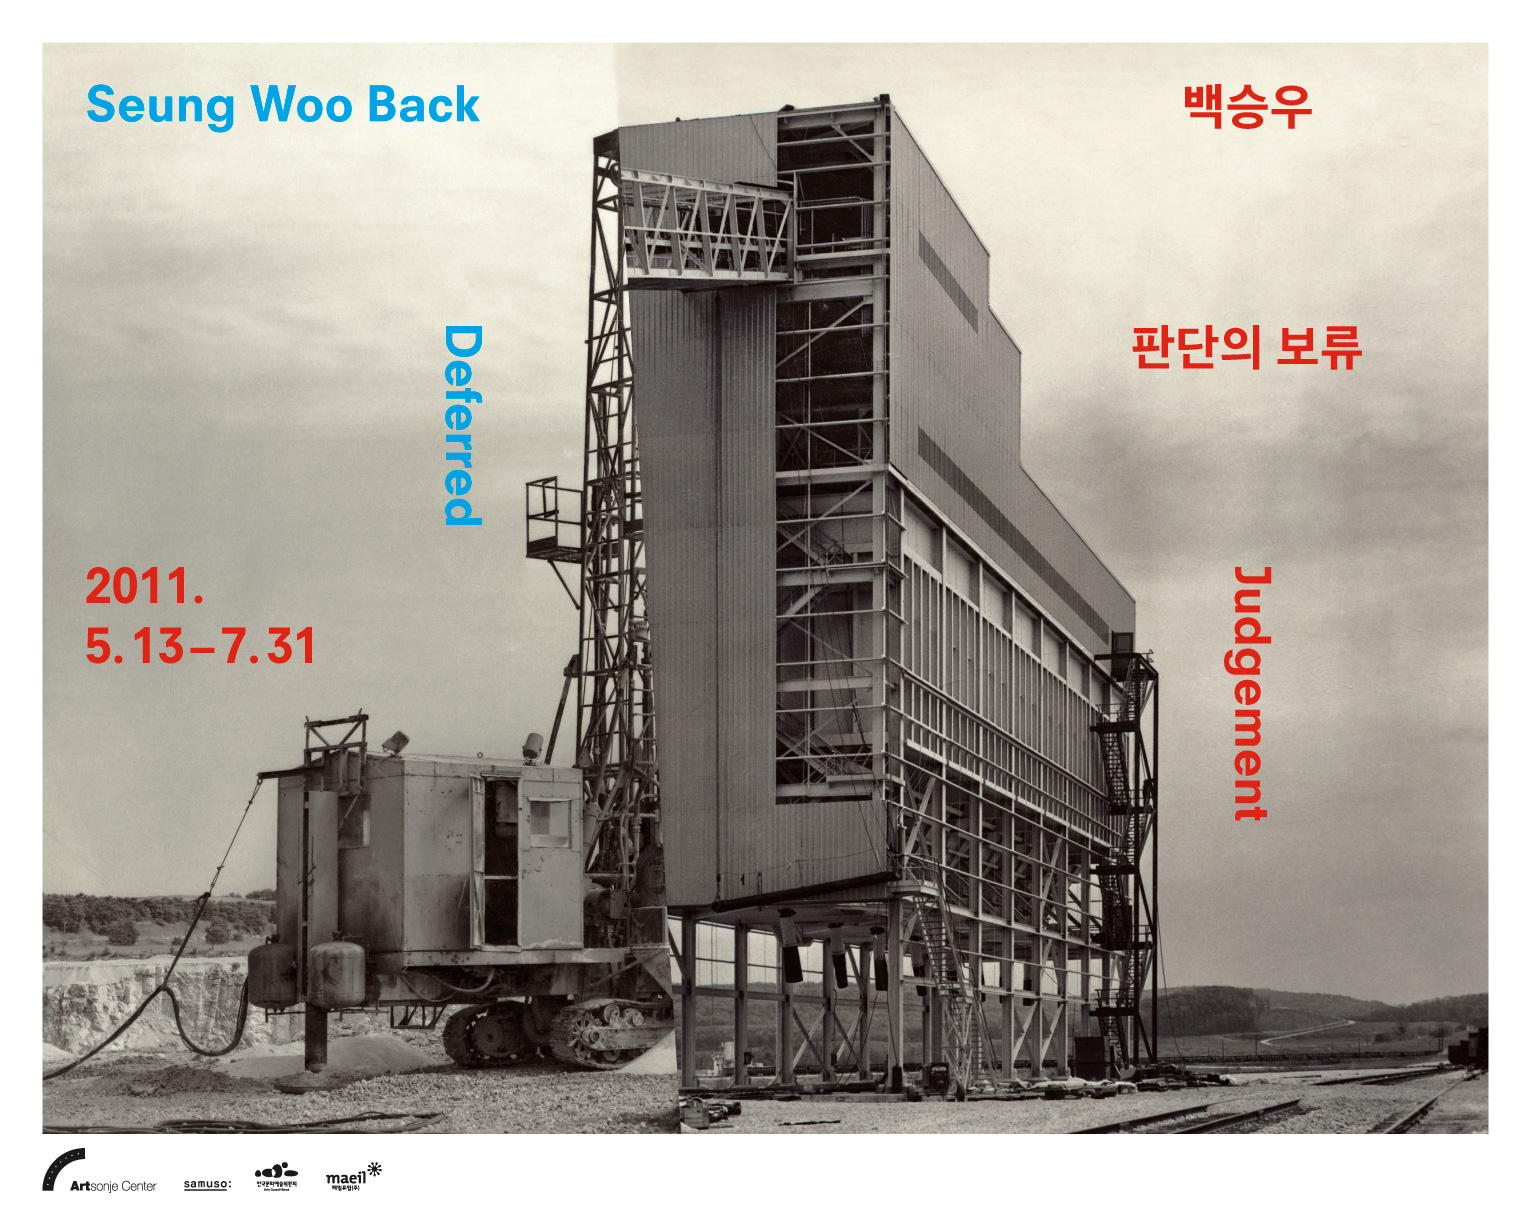 Seung Woo Back: On-Site Banner